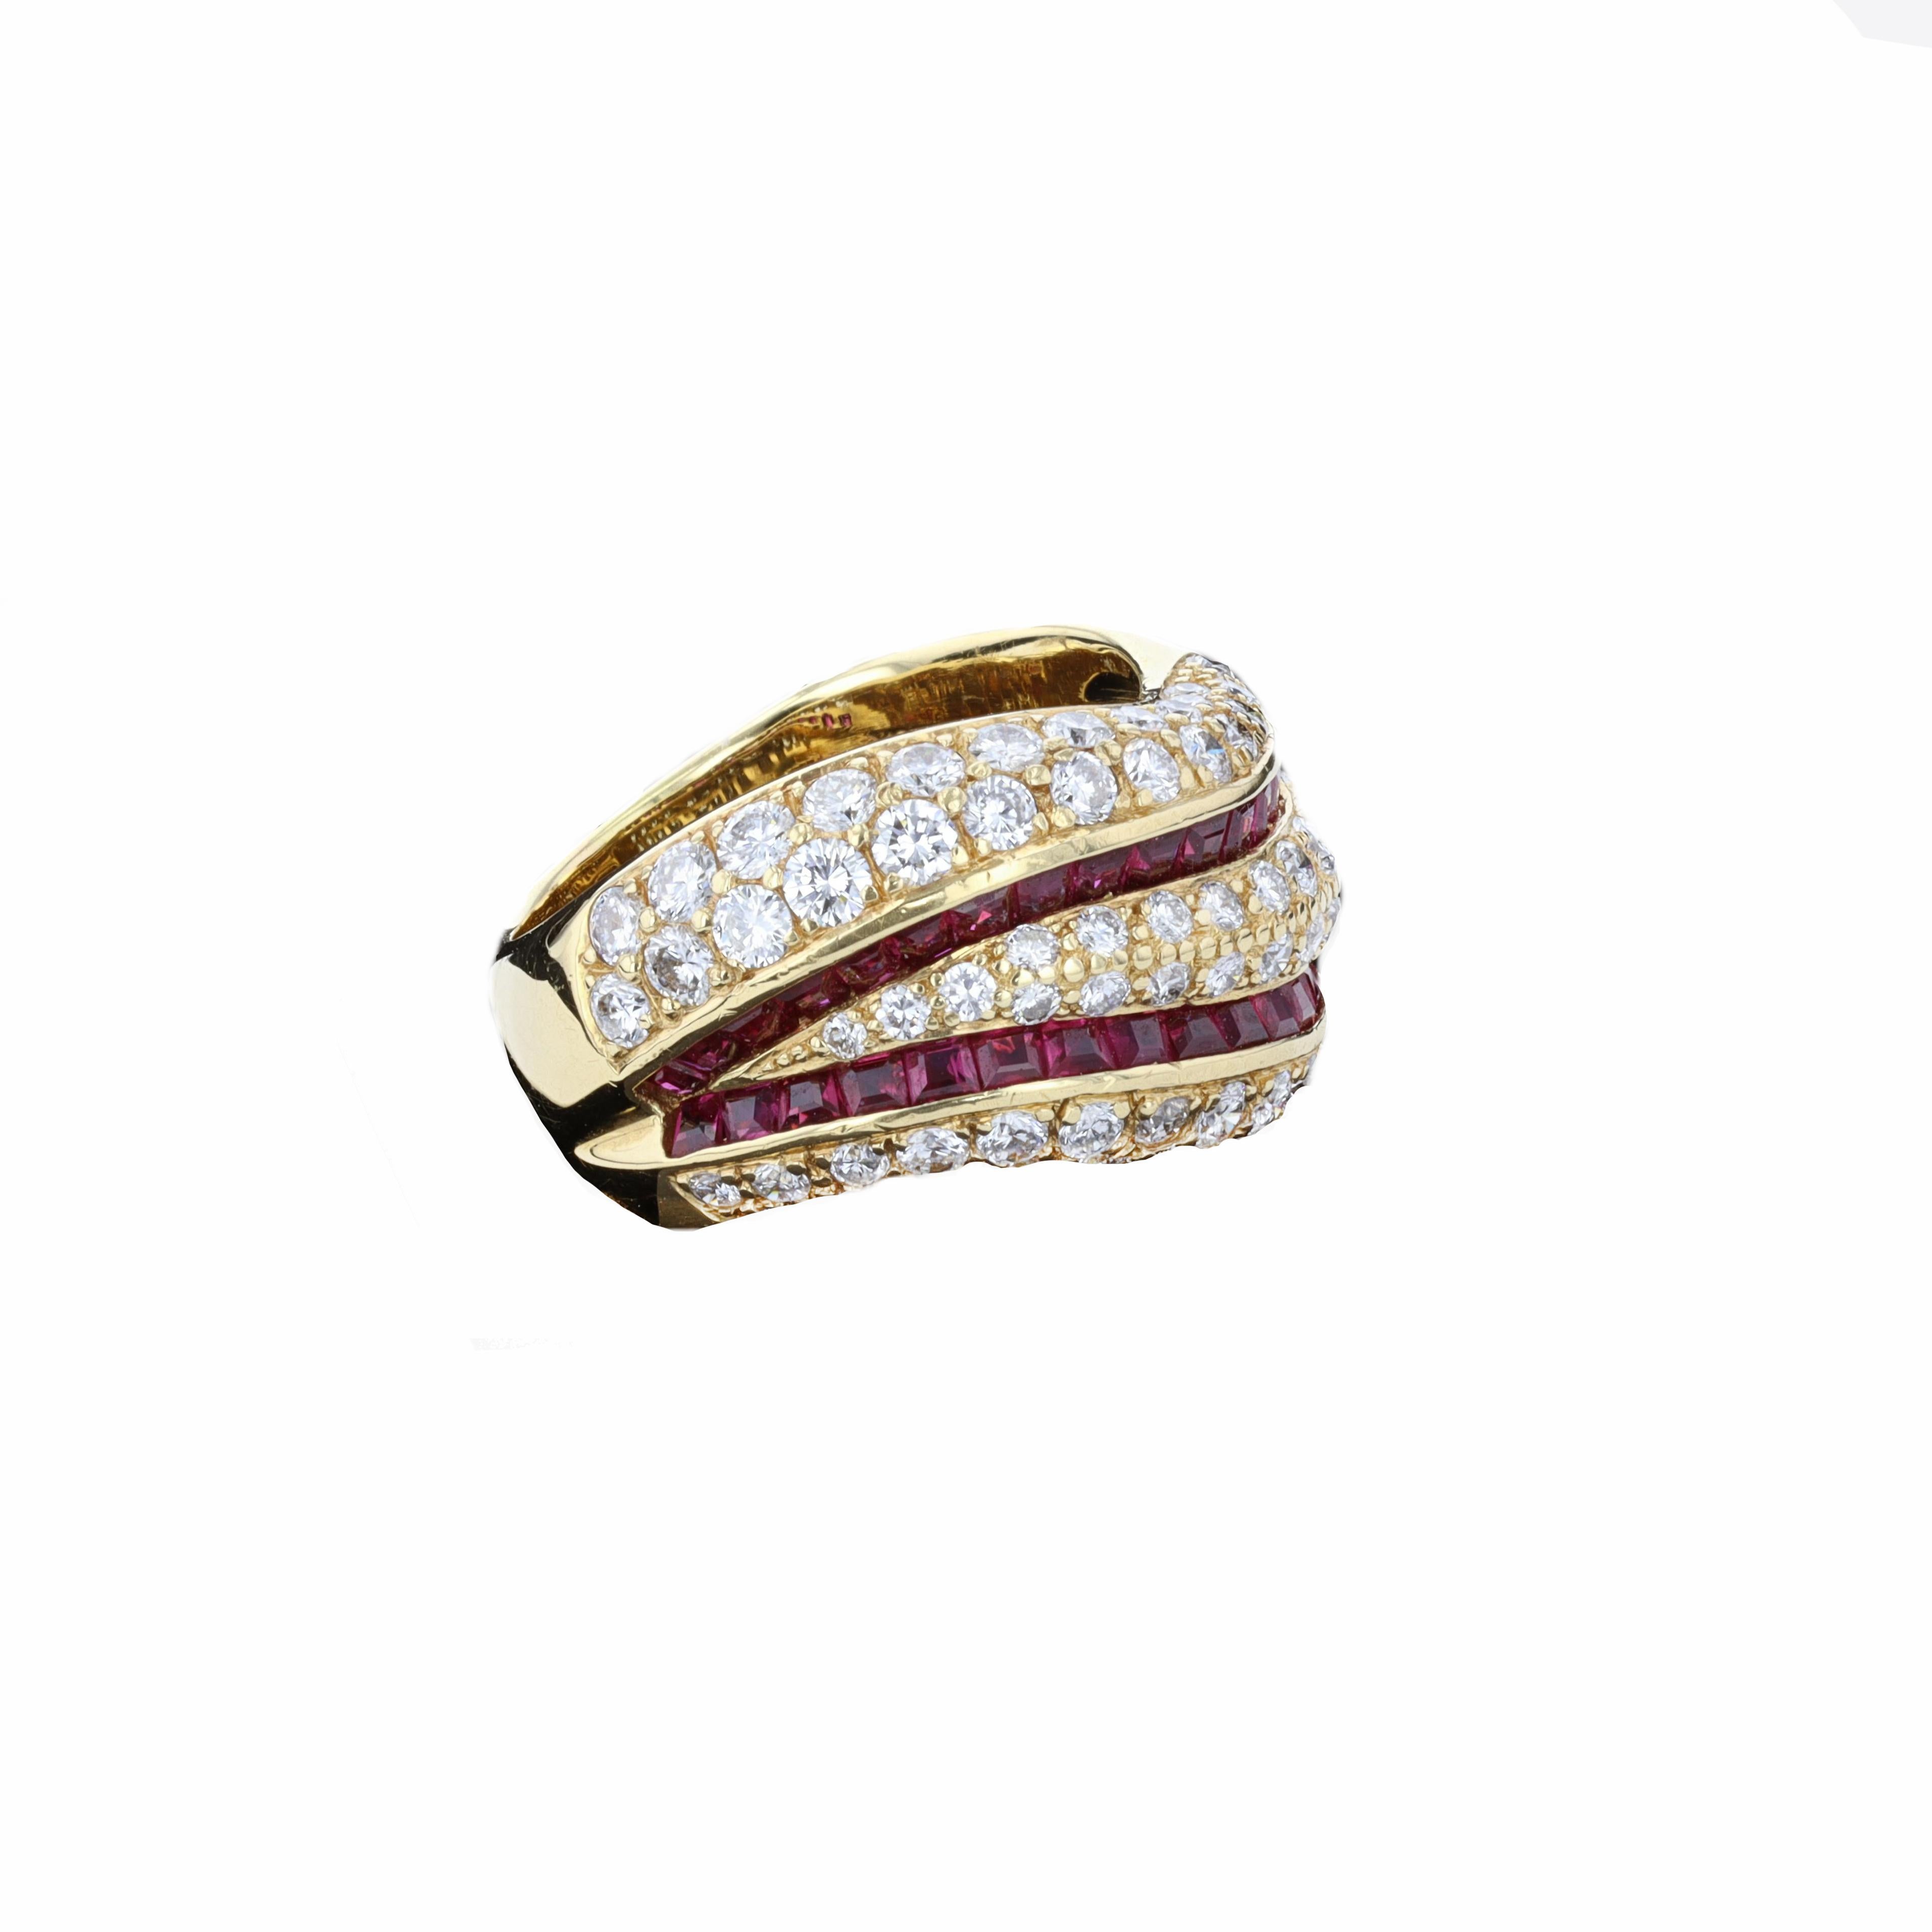 Funky & chunky, this cocktail ring makes a bold statement with an organic flowing design. Alternating waves of square rubies and round diamonds are set in bright 18k yellow gold, bringing out the natural warmth of the rubies’ color.

